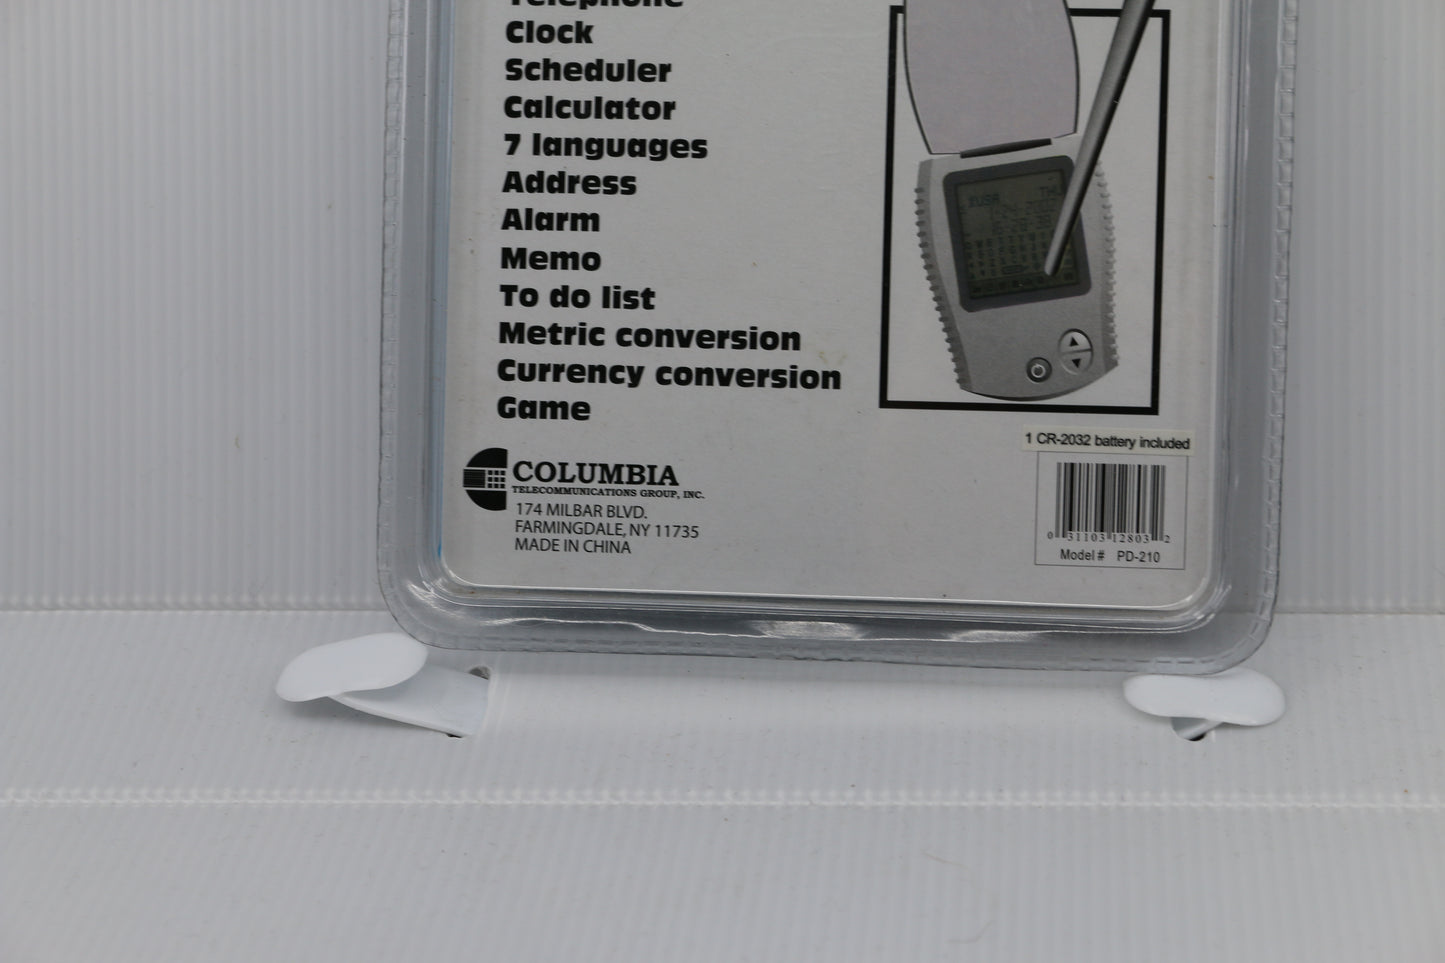 New Columbia 64 KB PDA Touch Screen 7 Languages PD-210 Digital Assistant